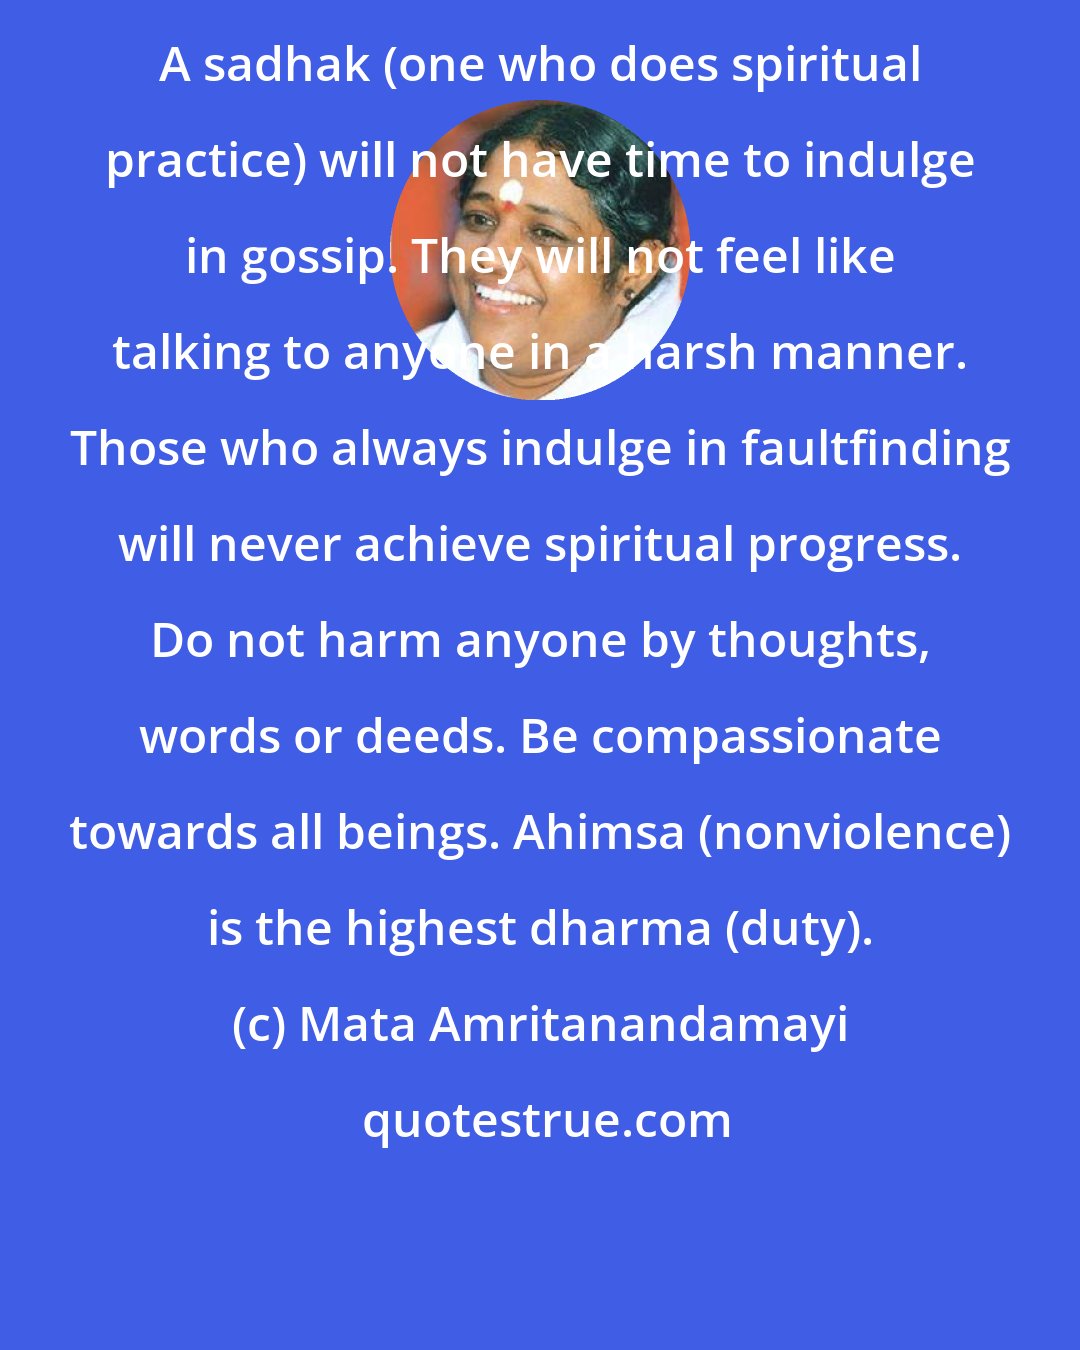 Mata Amritanandamayi: A sadhak (one who does spiritual practice) will not have time to indulge in gossip. They will not feel like talking to anyone in a harsh manner. Those who always indulge in faultfinding will never achieve spiritual progress. Do not harm anyone by thoughts, words or deeds. Be compassionate towards all beings. Ahimsa (nonviolence) is the highest dharma (duty).